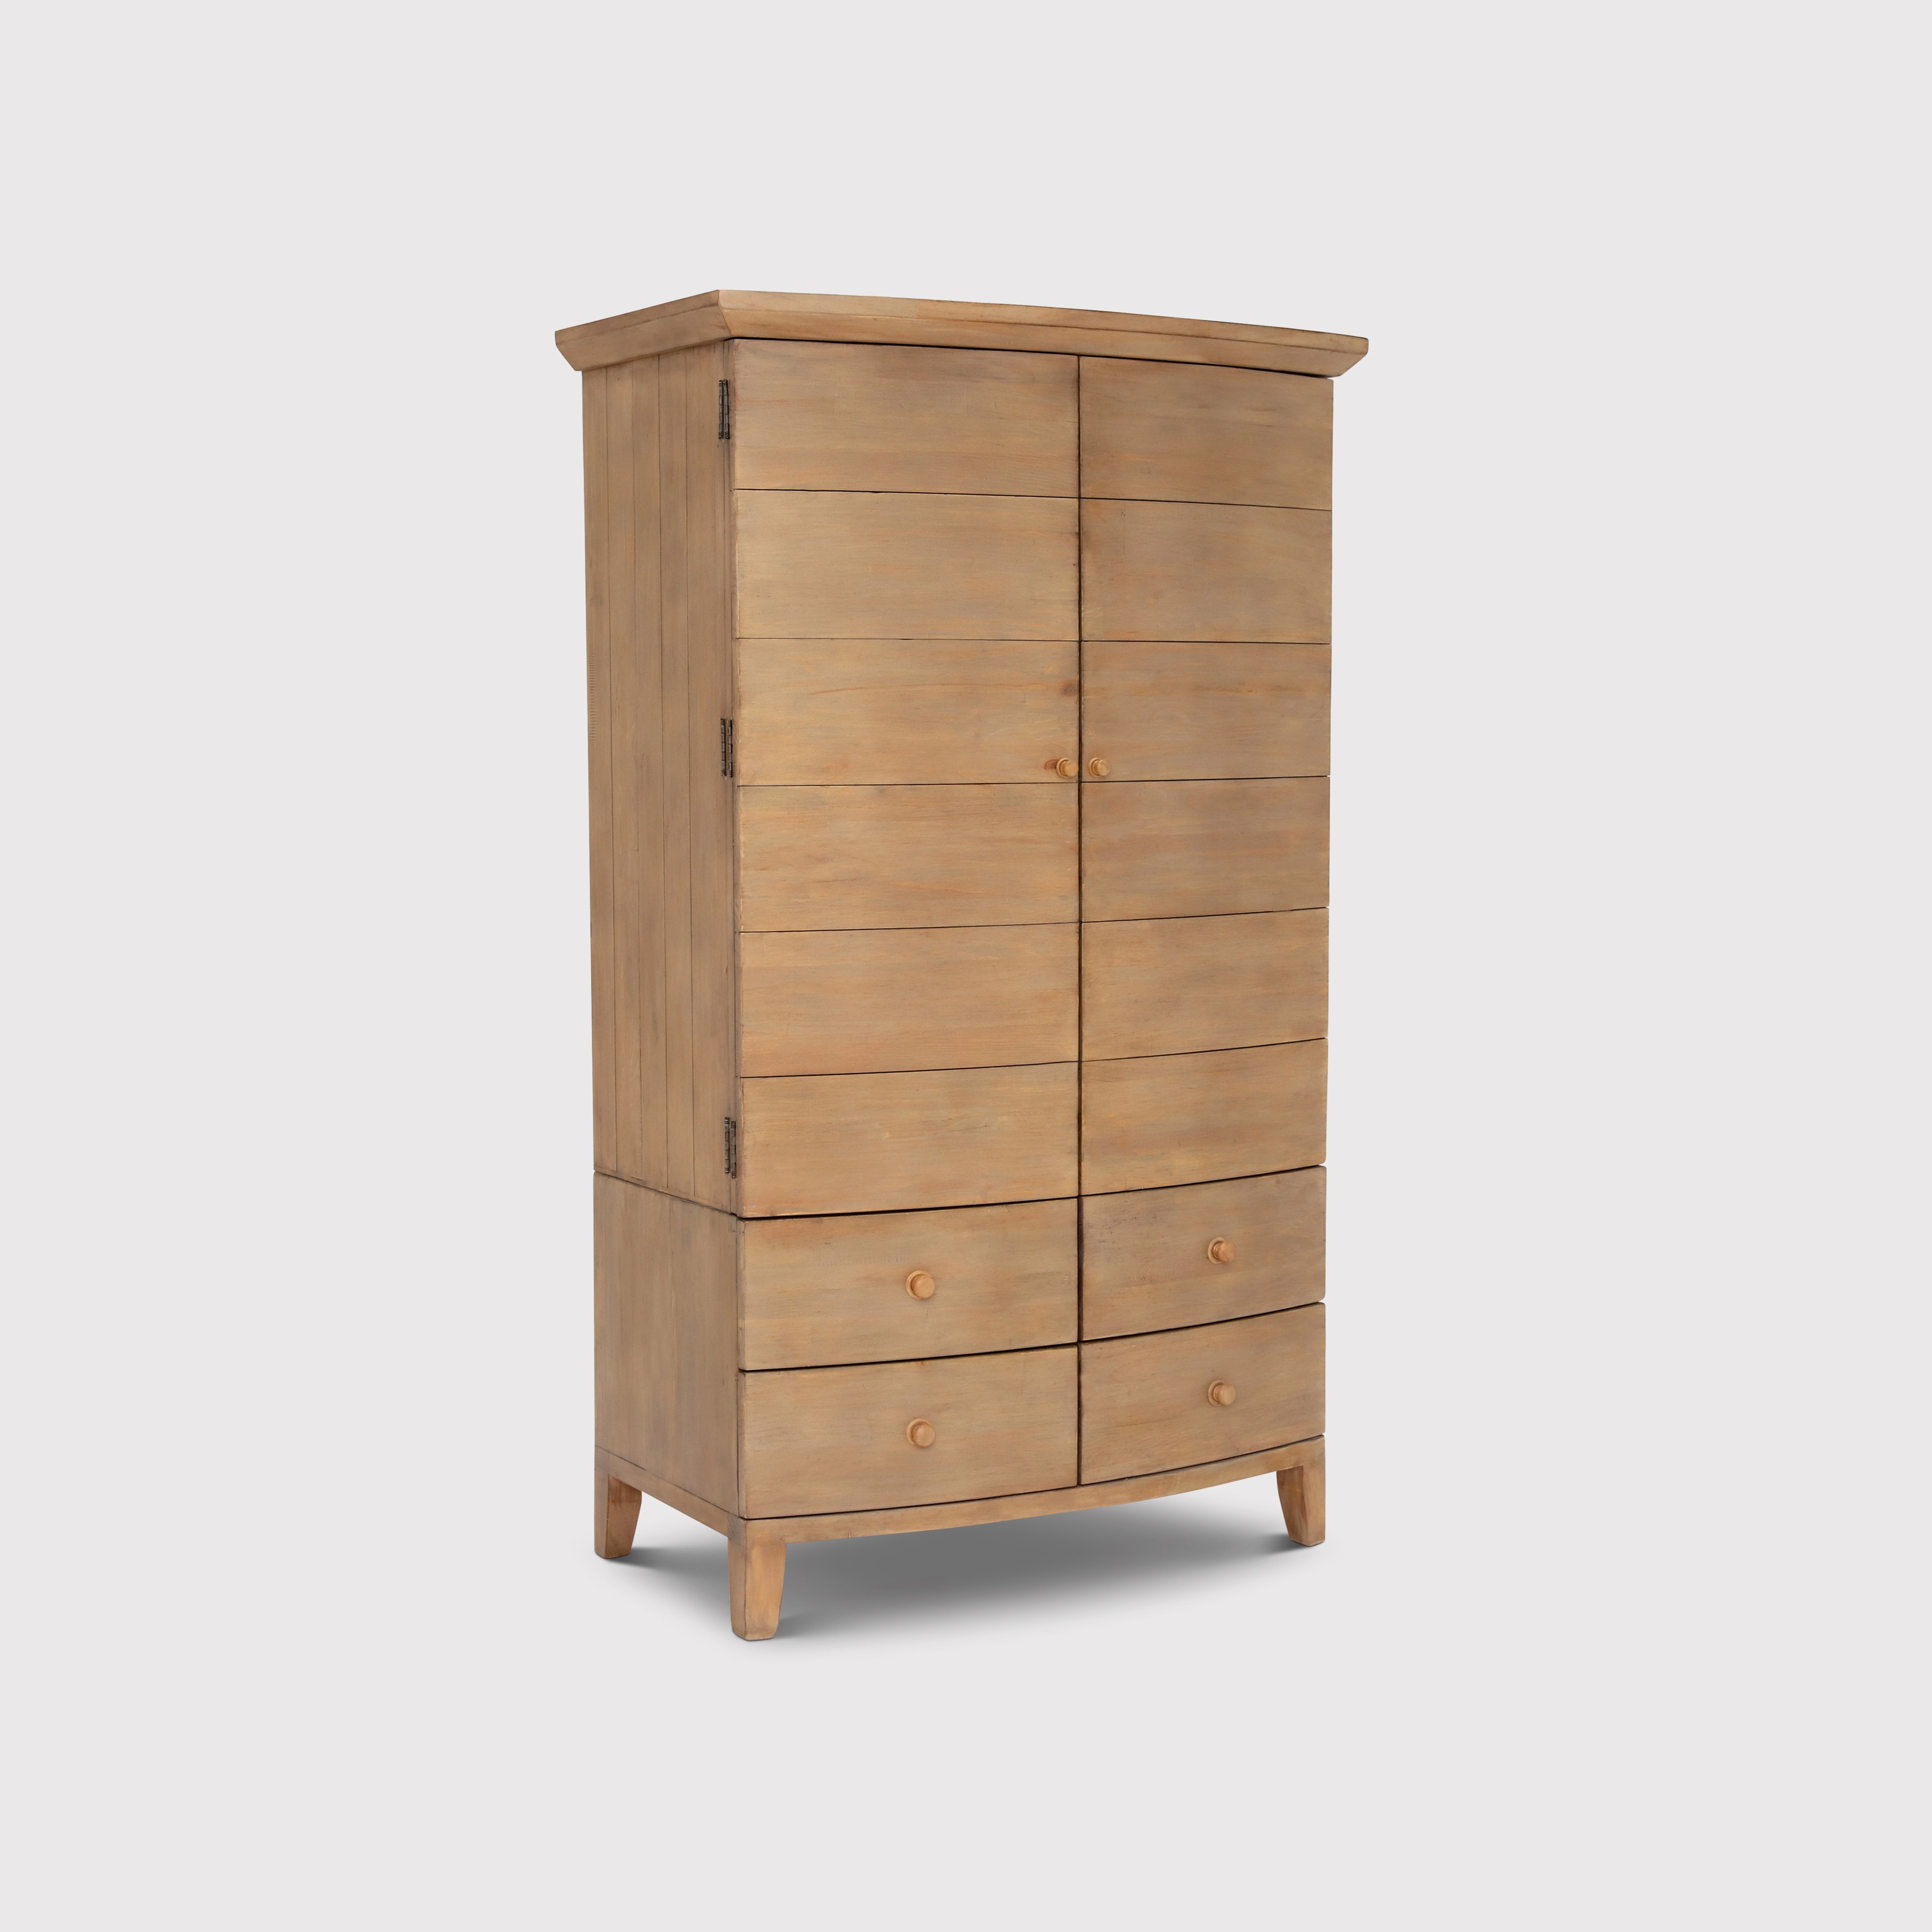 Lewes Wardrobe With 4 Drawer Base, Brown | Barker & Stonehouse